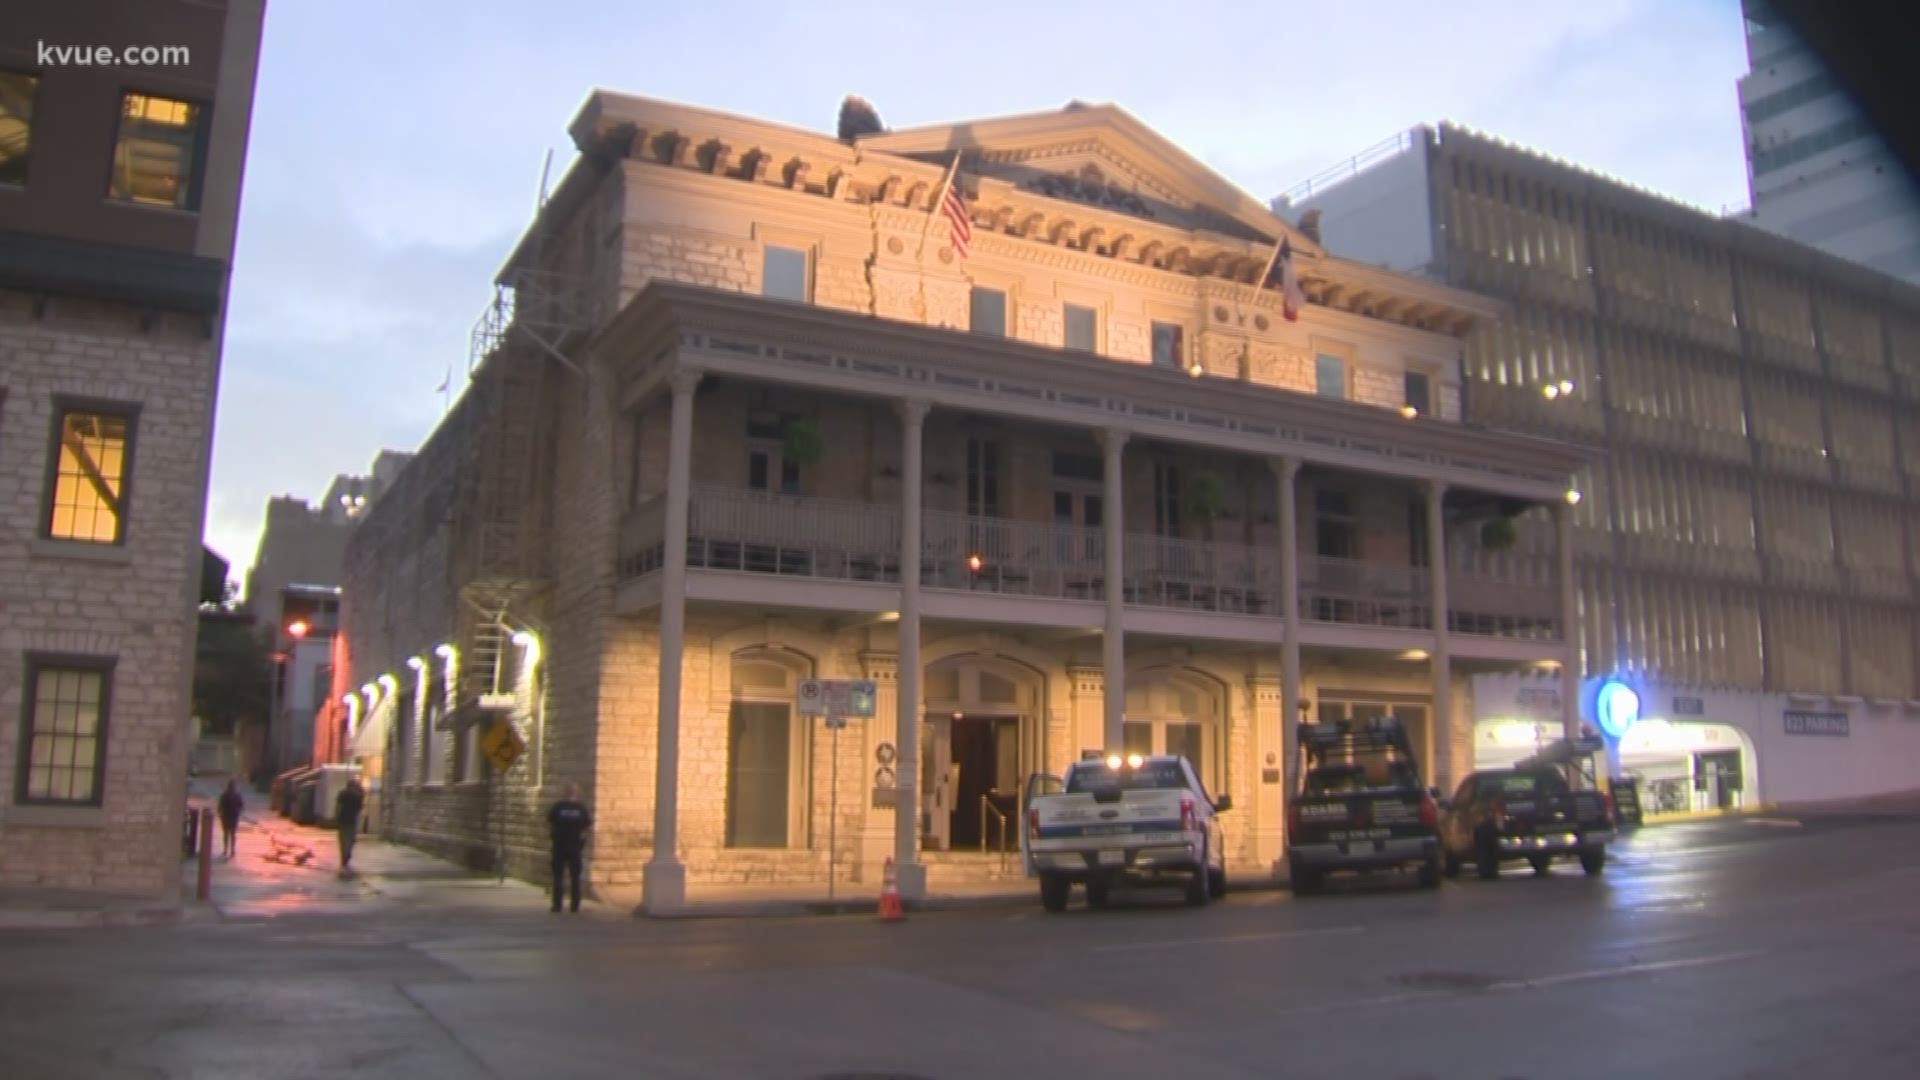 A suspect is in custody after a fire was reportedly intentionally set at a historic downtown Austin building, Austin Fire said.